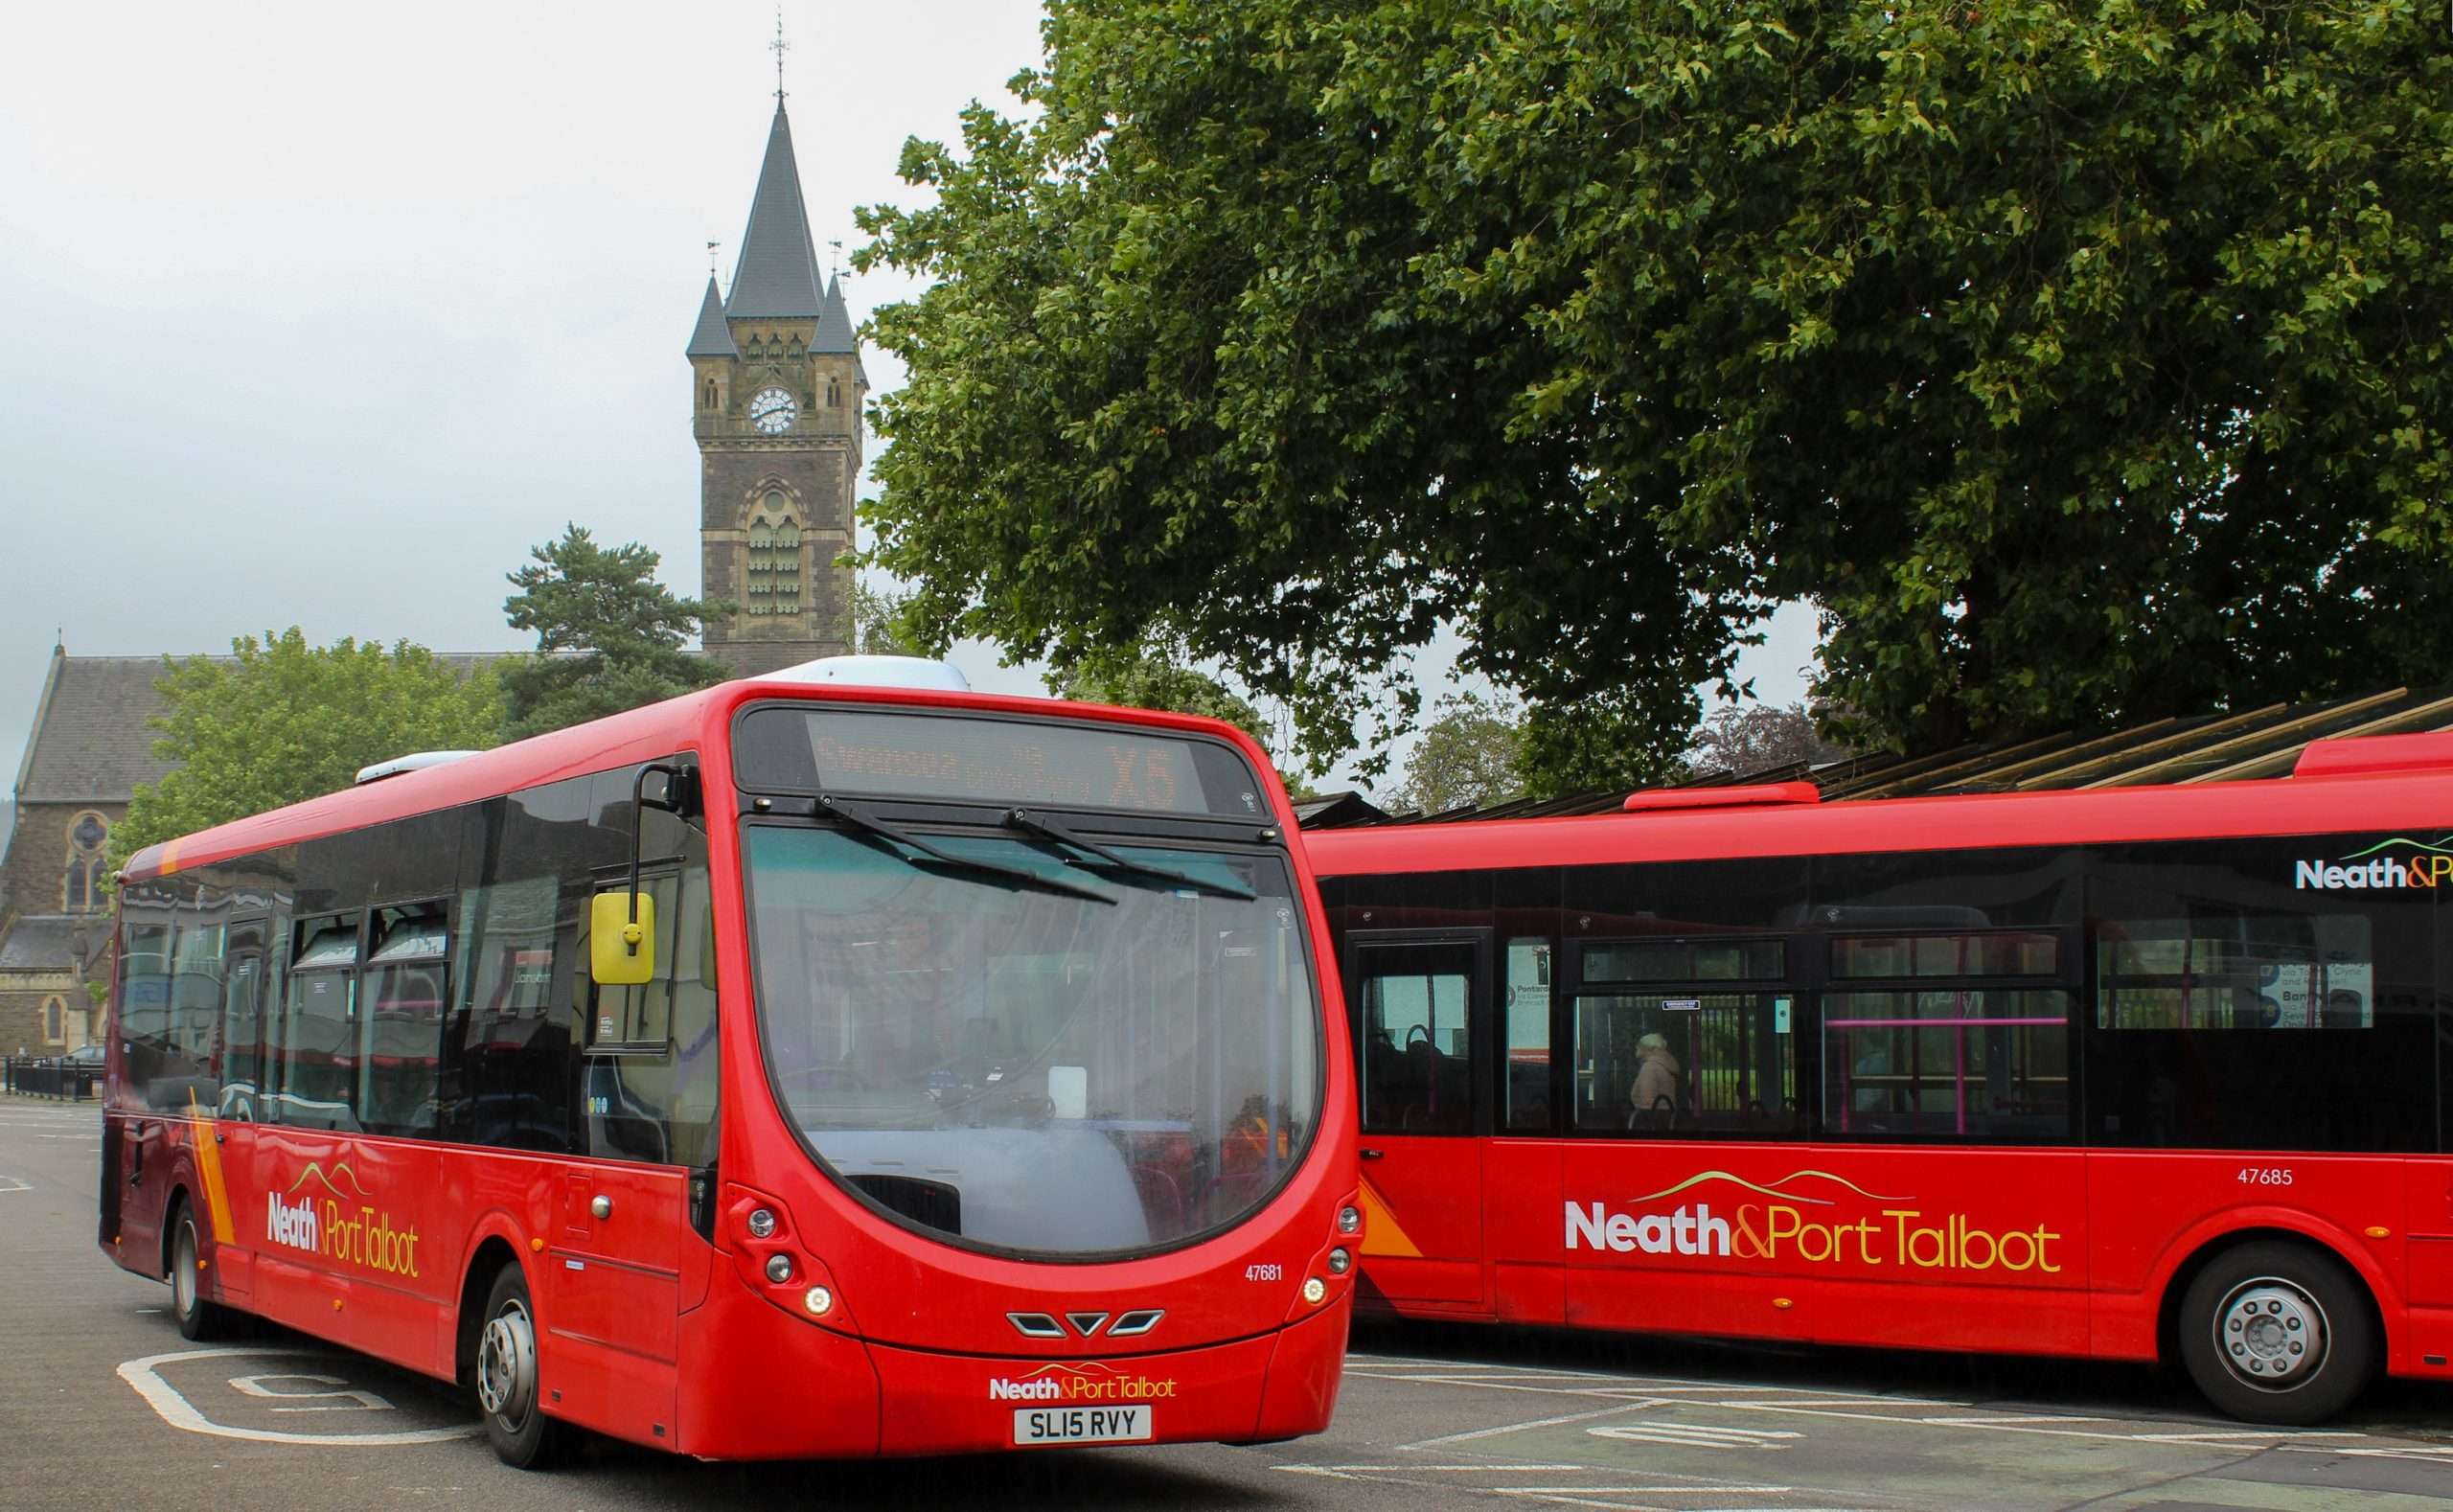 Making bus travel simpler for thousands of customers